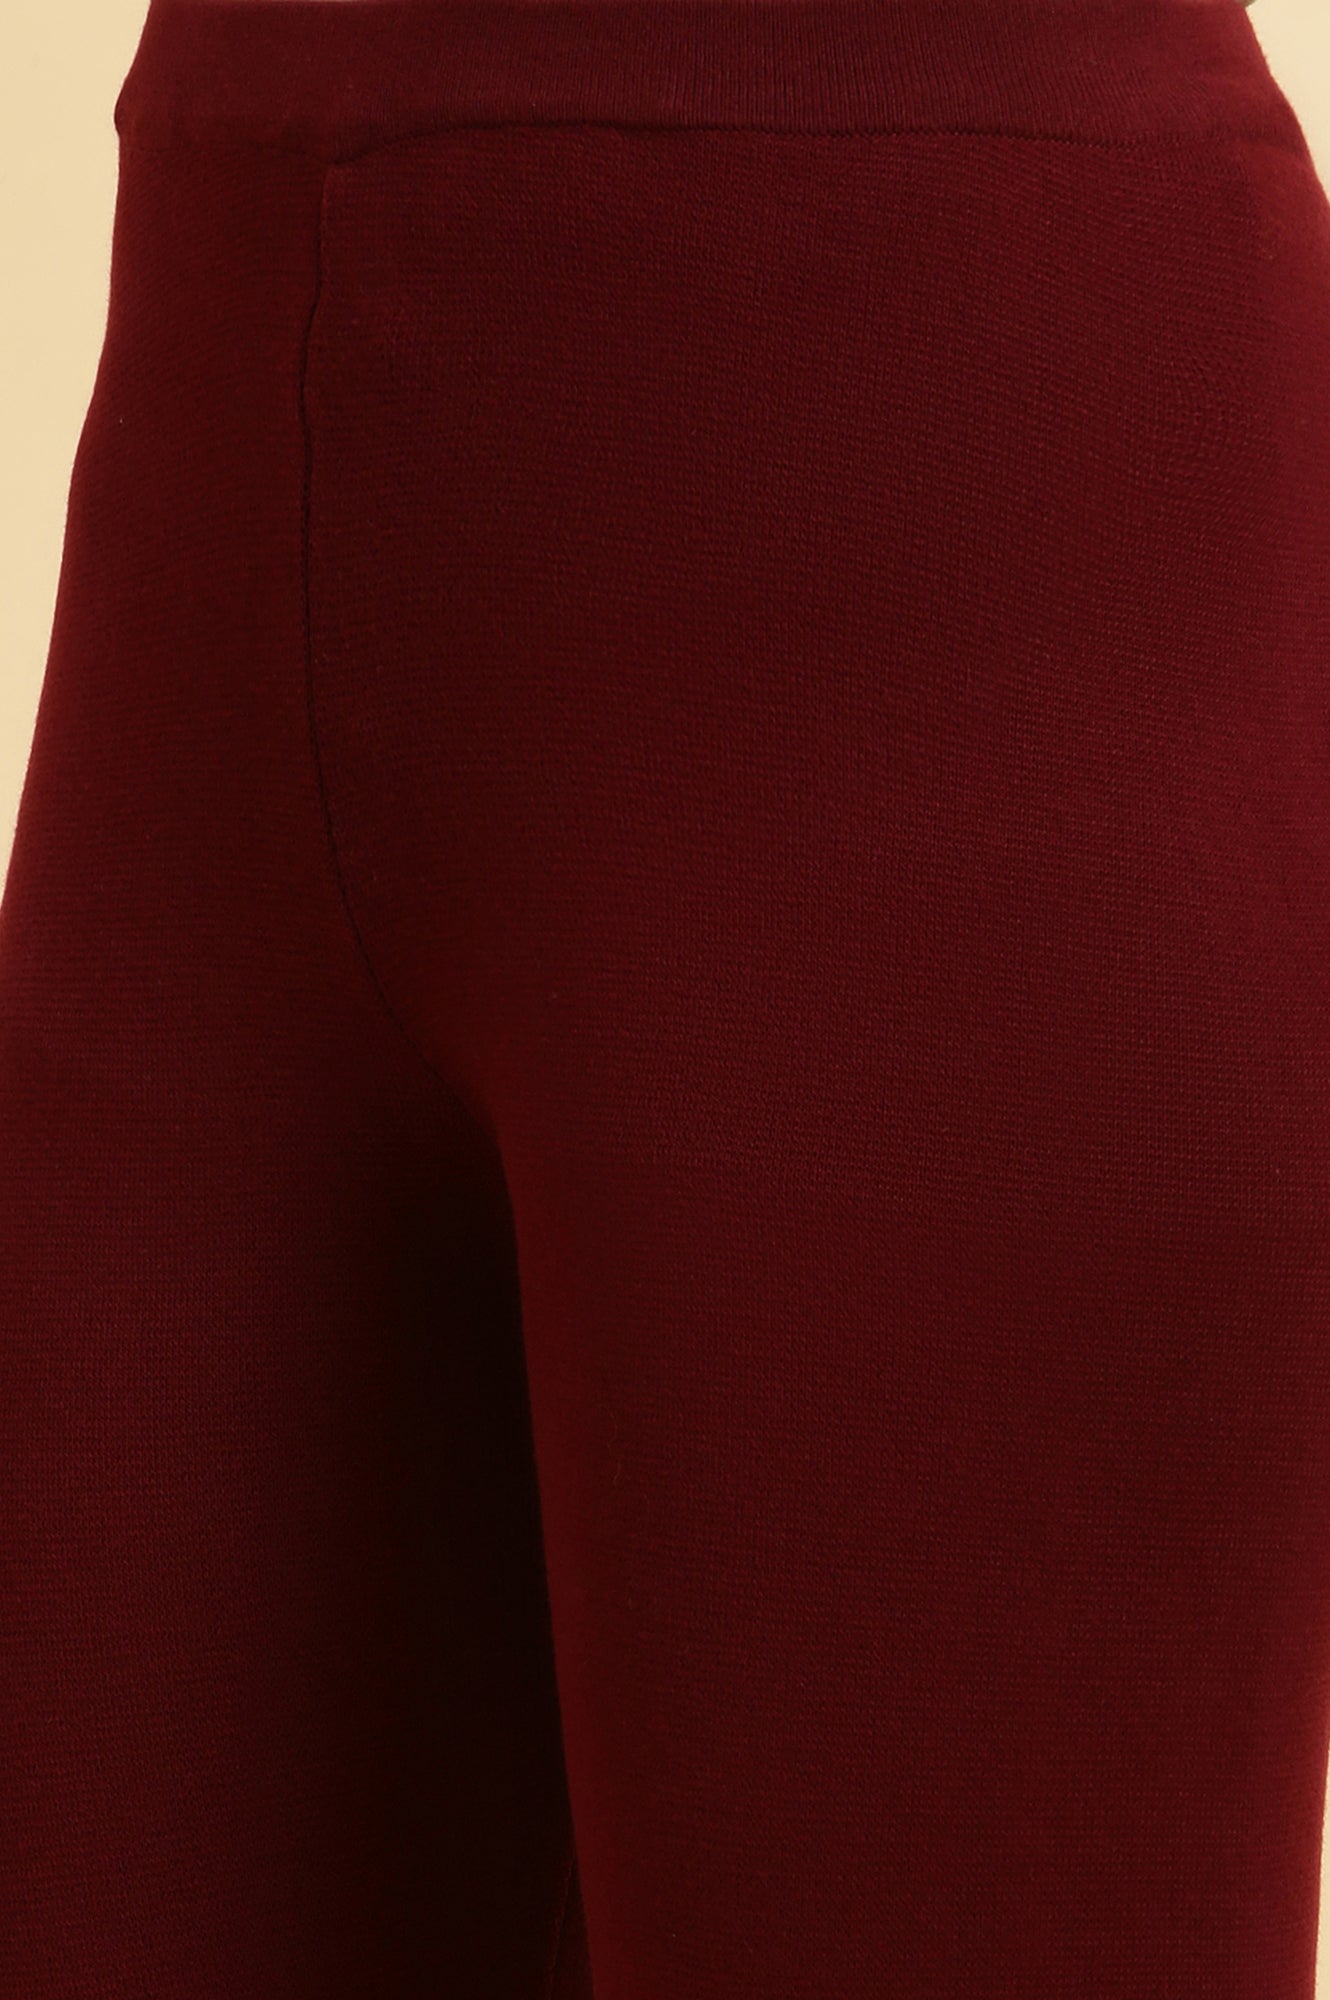 Maroon Solid Fit And Flare Pants